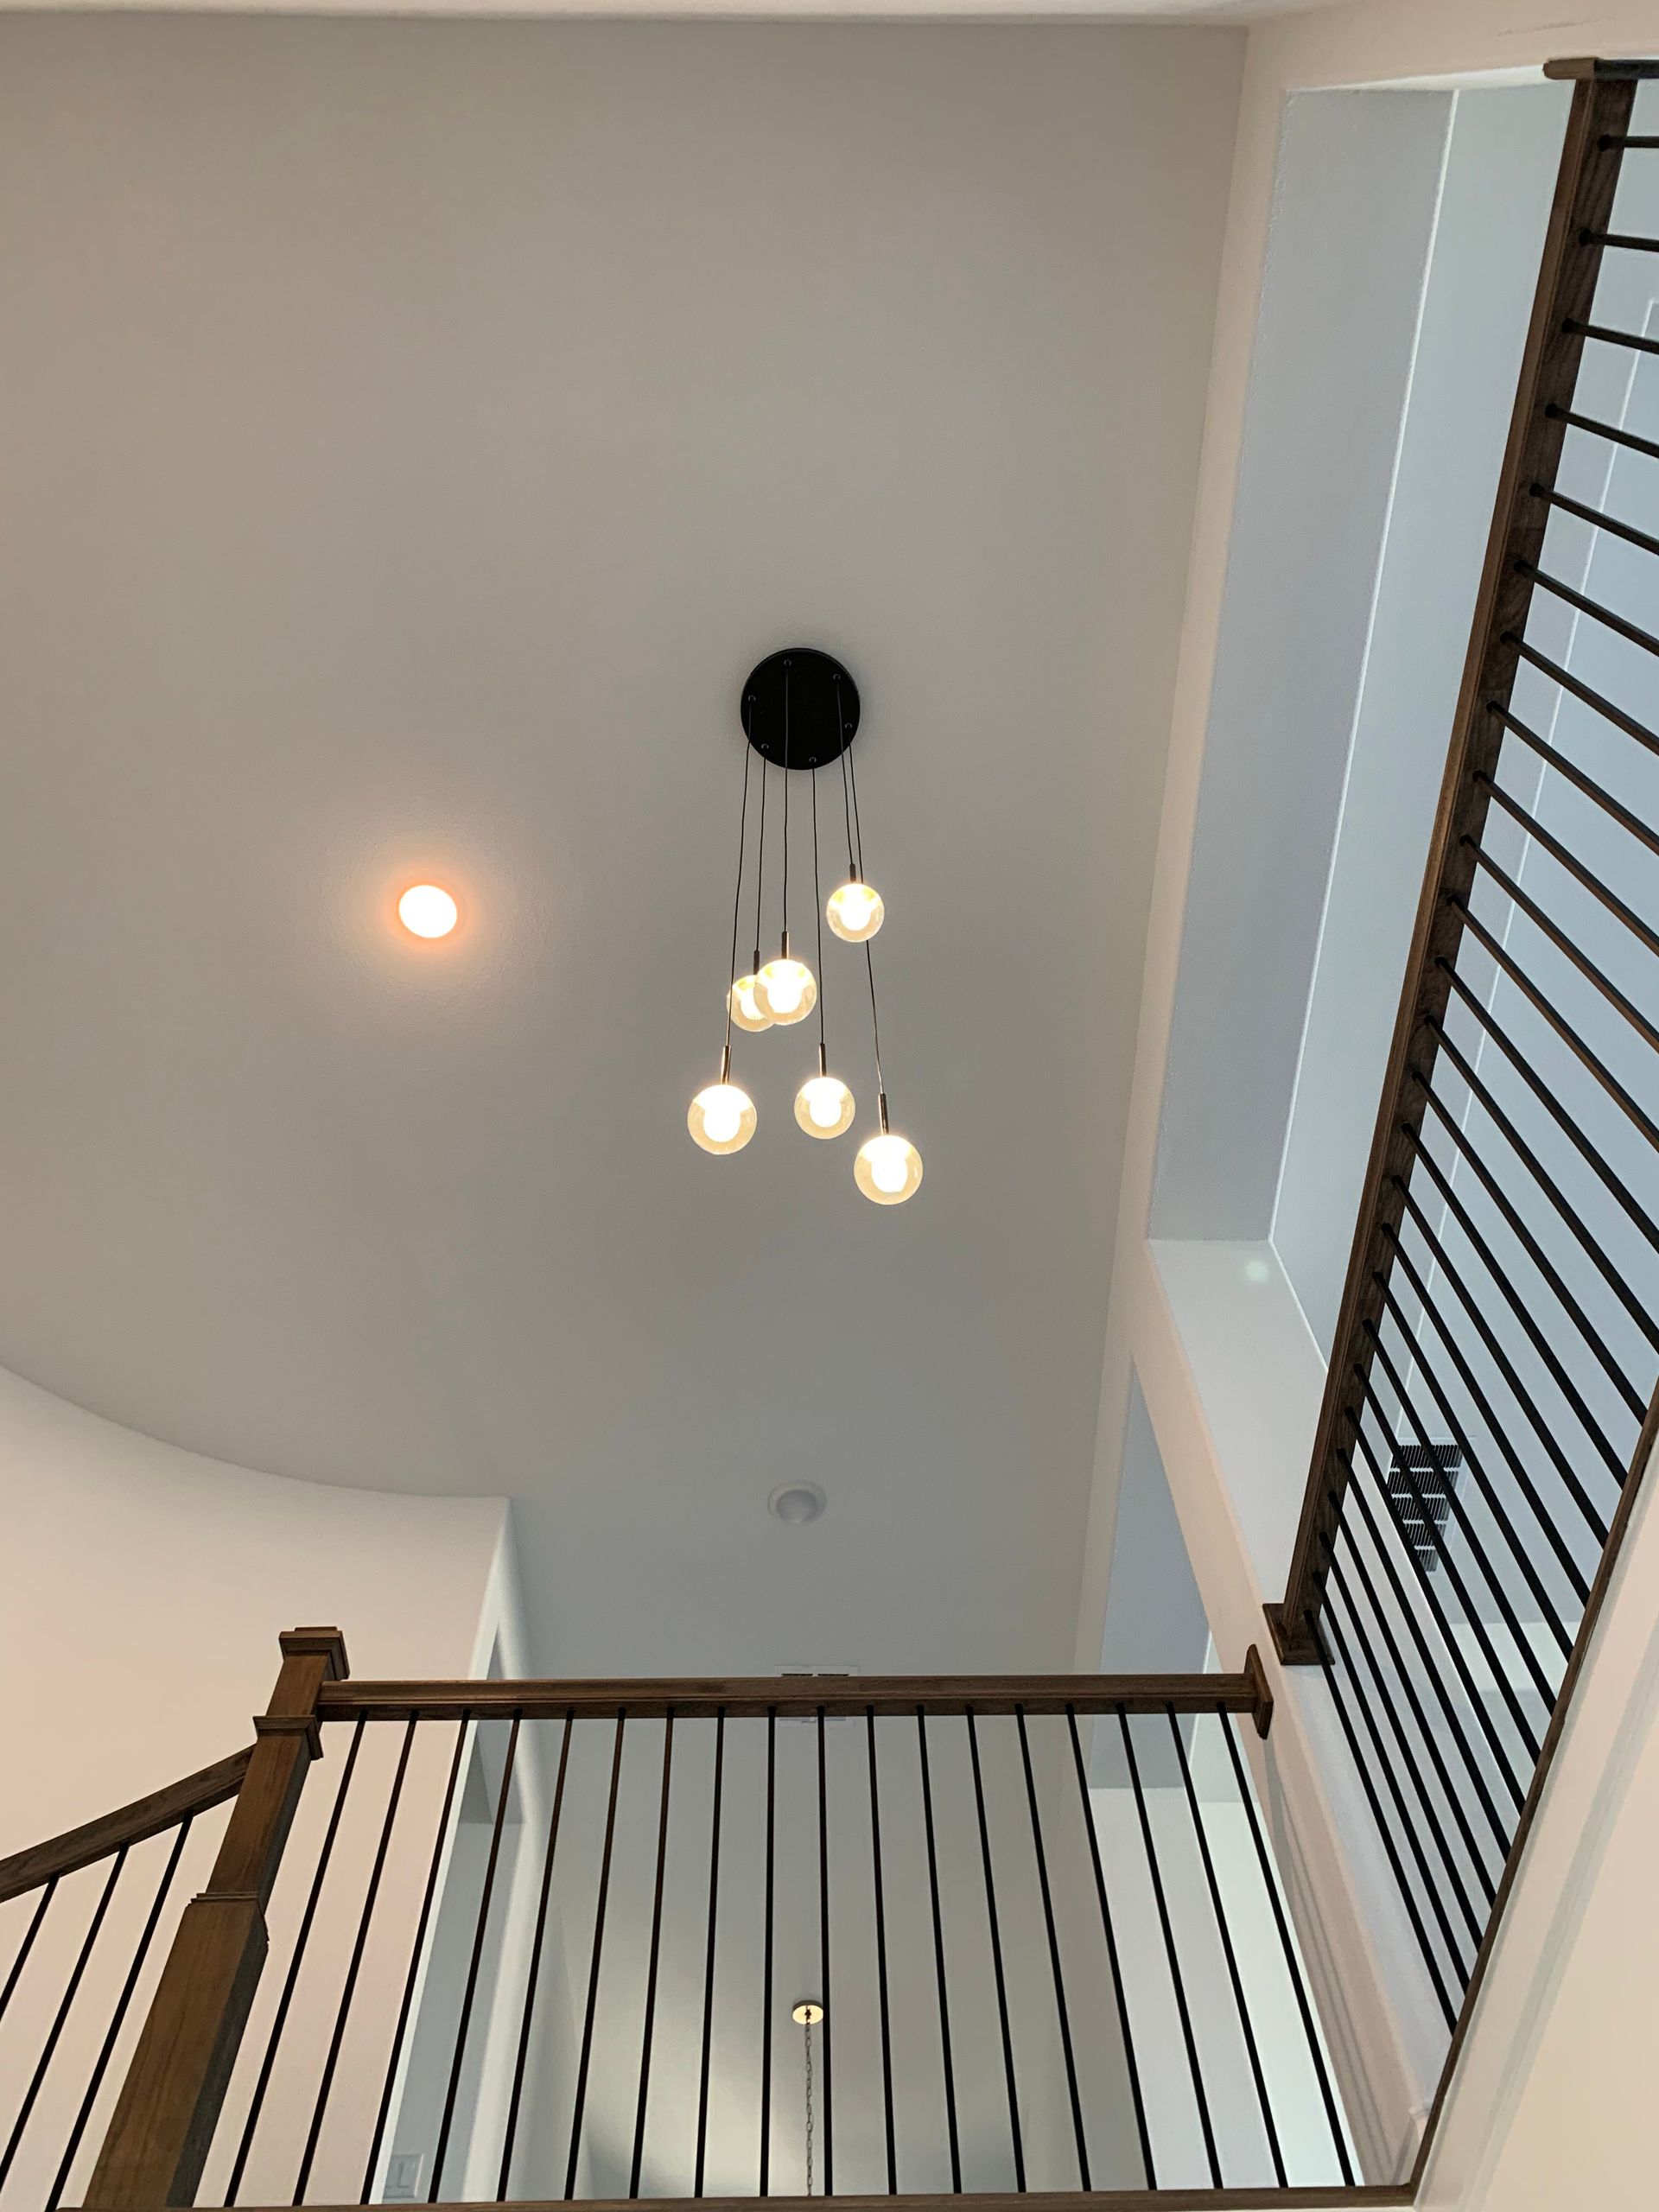 An image showcasing a professional lighting service in action. Skilled technicians are installing and adjusting lighting fixtures in a room, creating an illuminated and welcoming atmosphere.